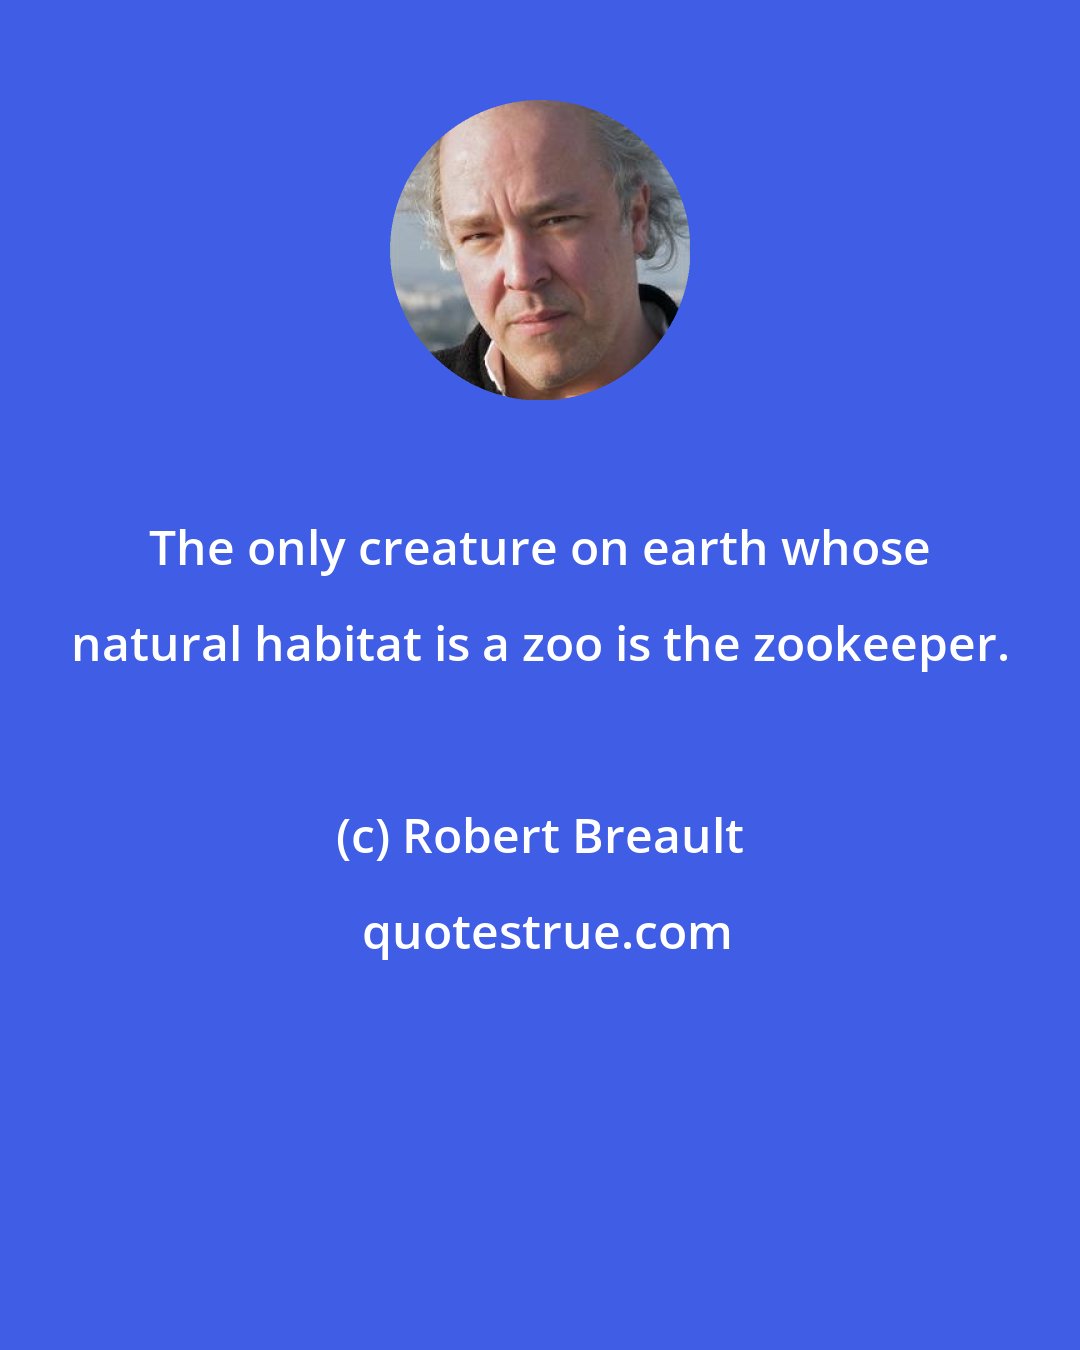 Robert Breault: The only creature on earth whose natural habitat is a zoo is the zookeeper.